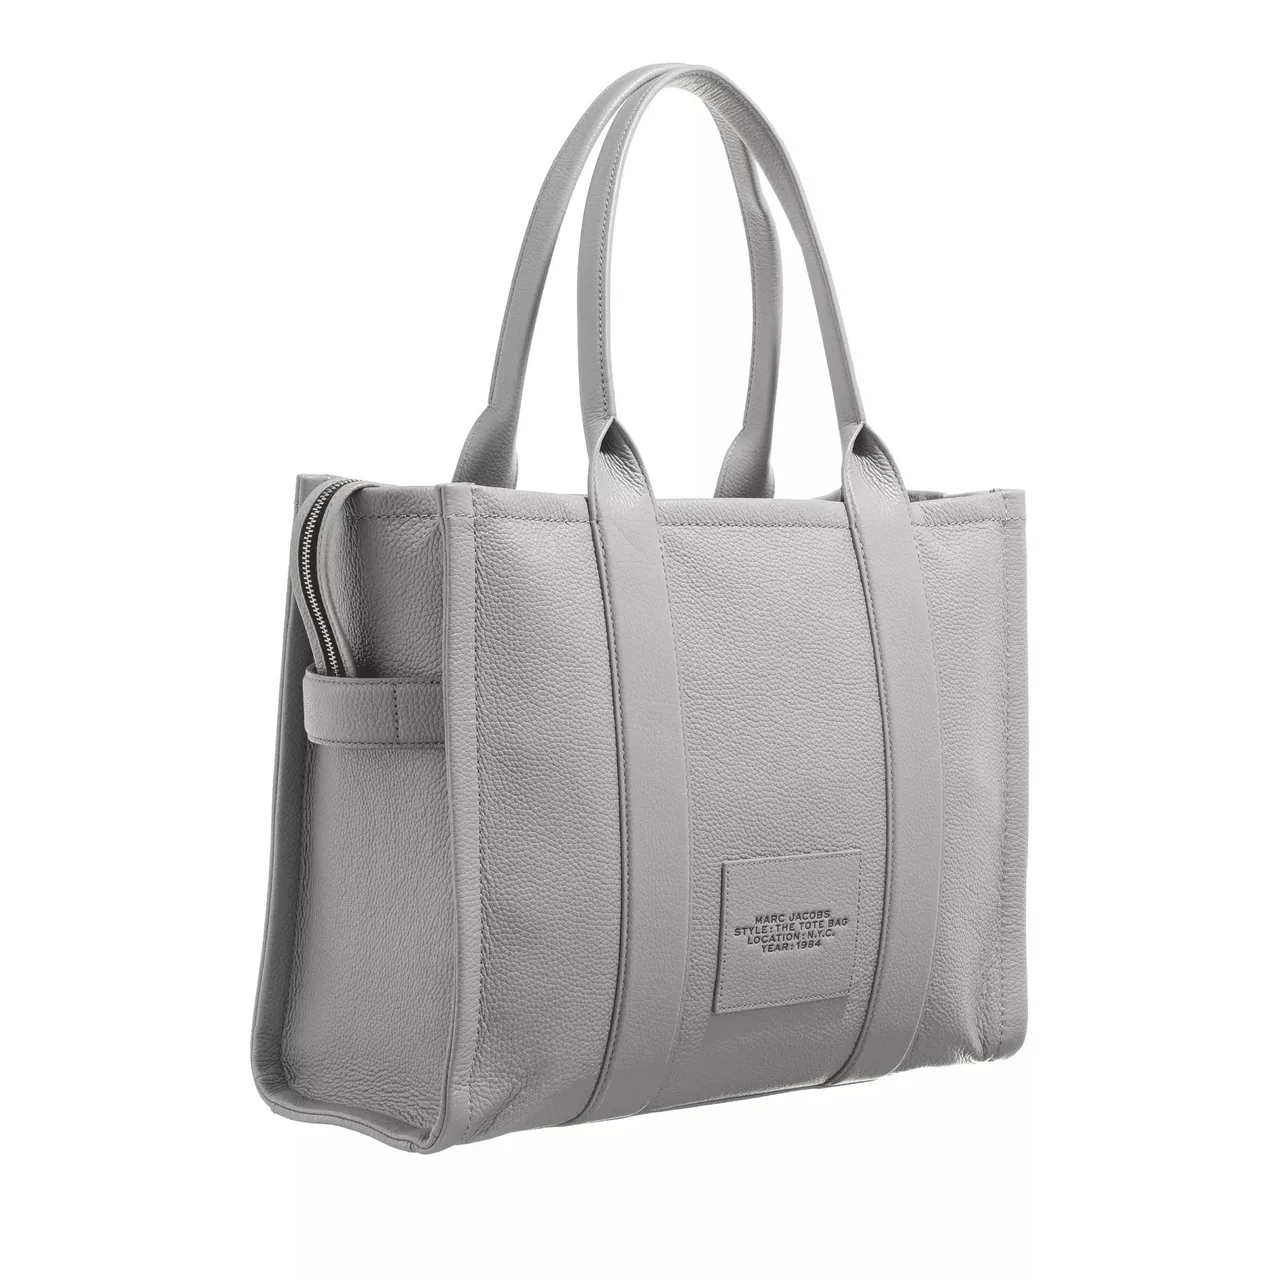 Marc Jacobs Tote Bags - The Large Tote - grey - Tote Bags for ladies